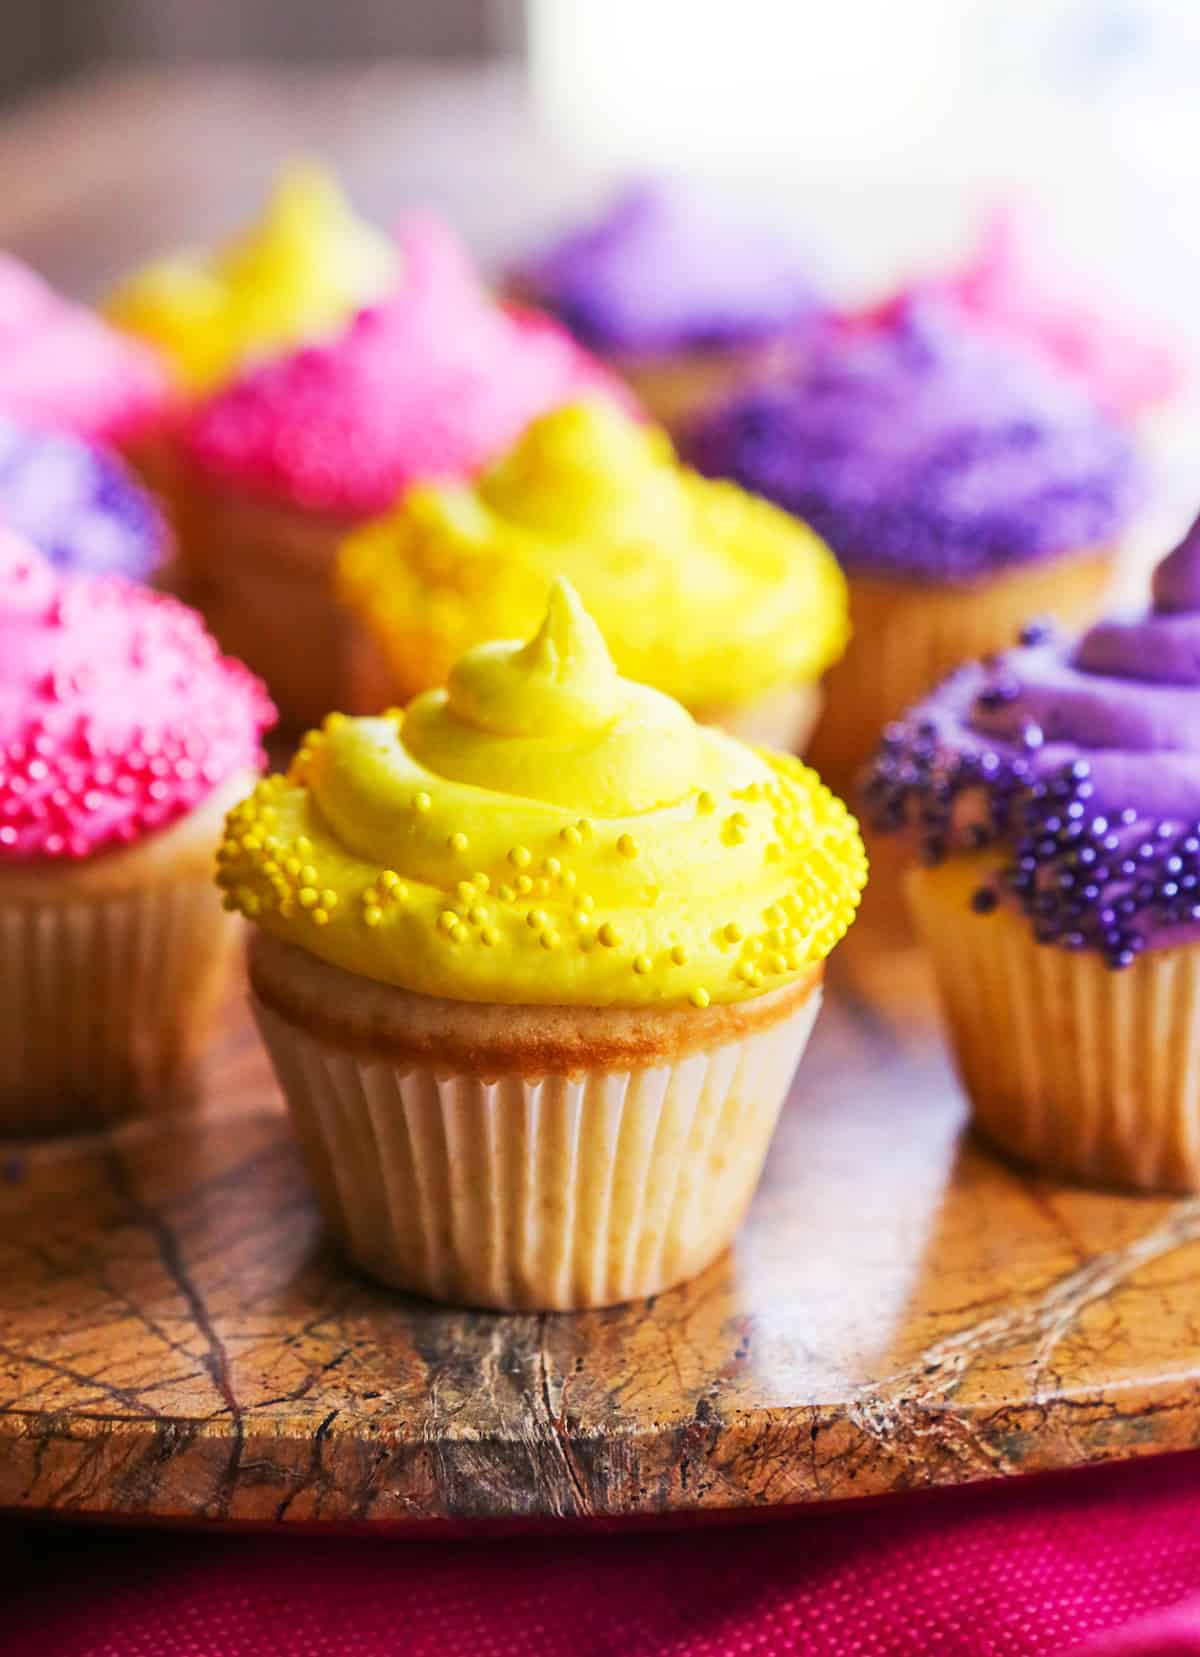 White cupcakes with yellow and purple frosting sitting on a serving platter.